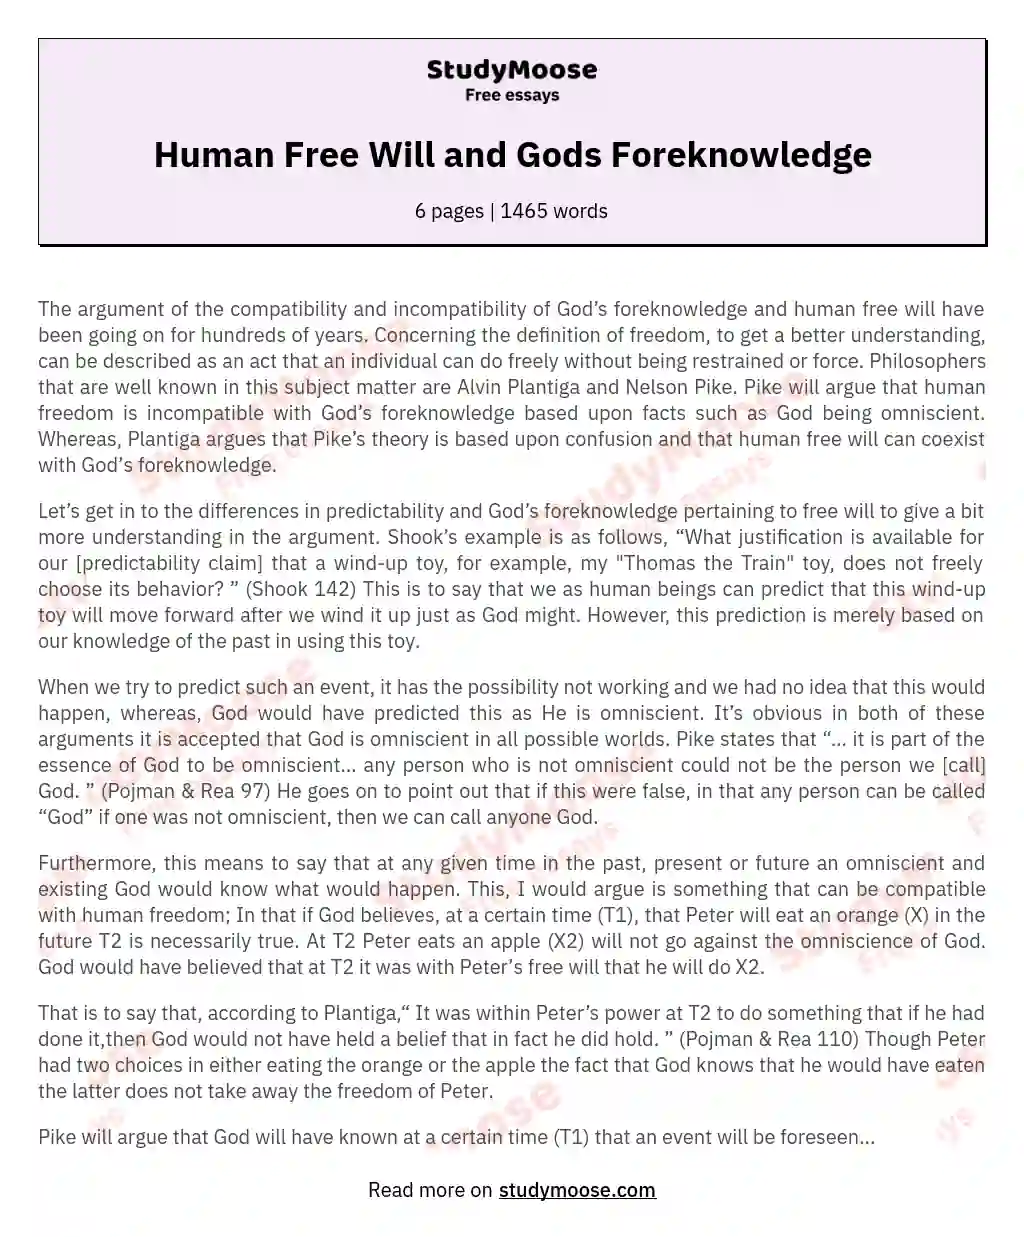 Human Free Will and Gods Foreknowledge essay